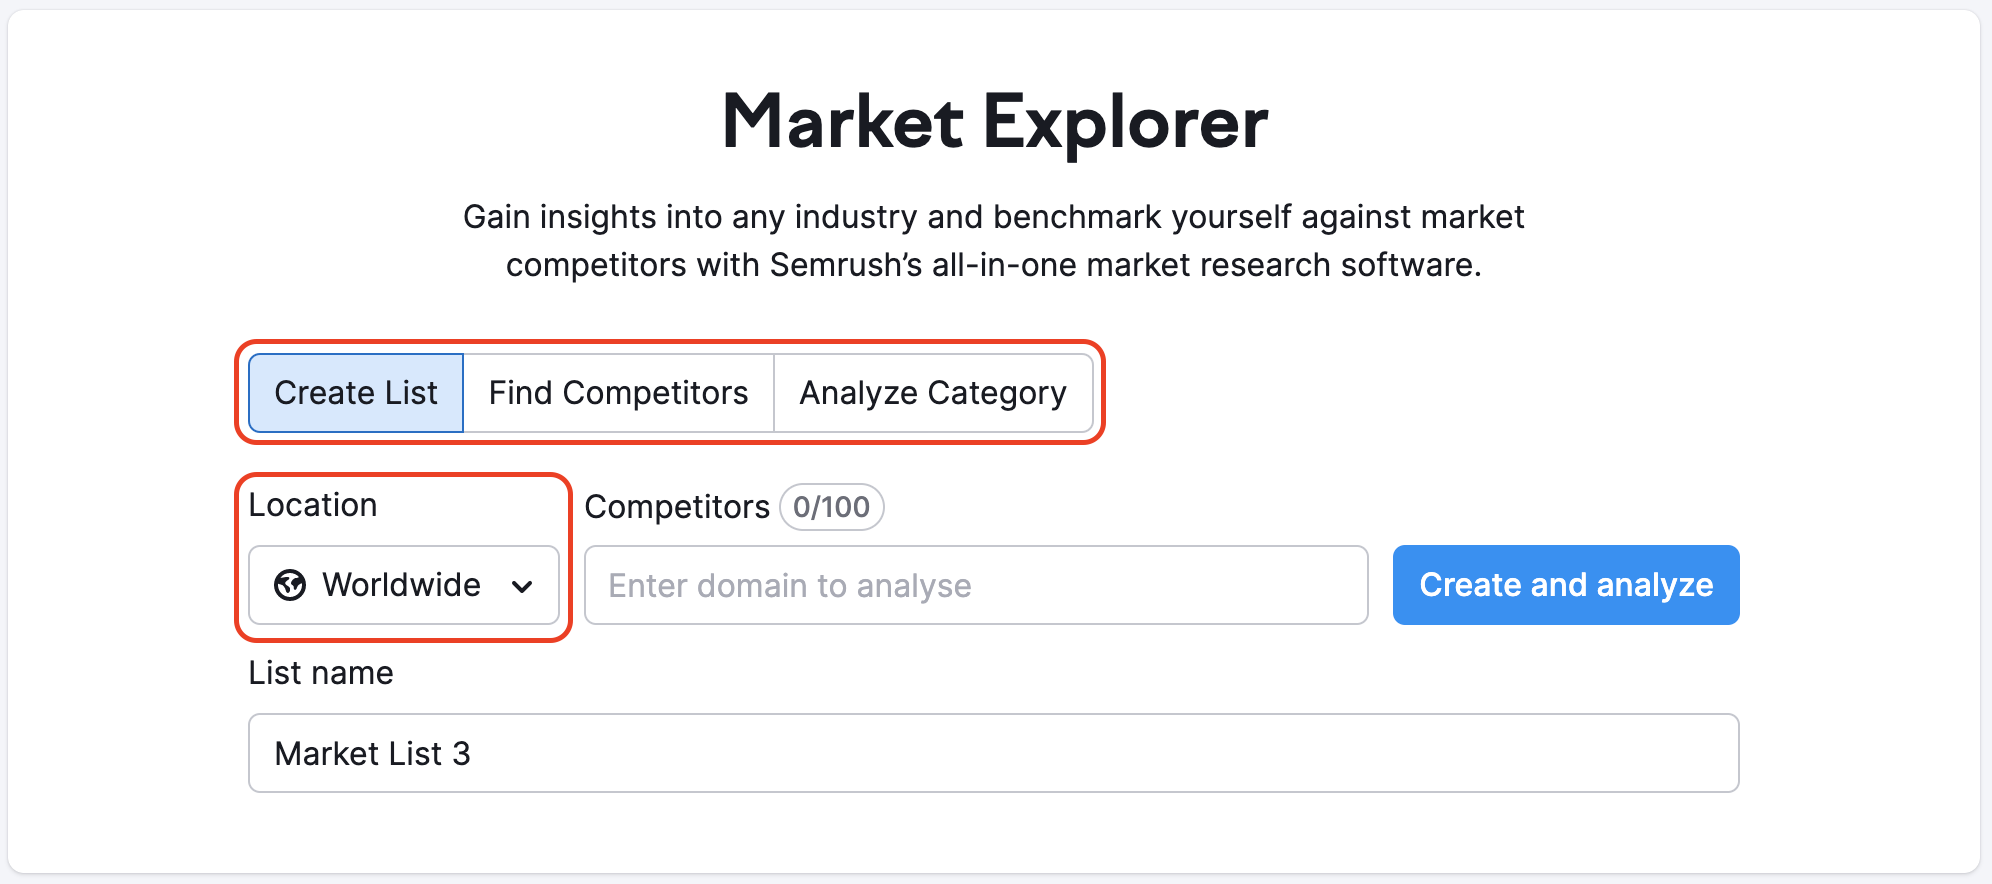 Market Explorer landing page with the buttons highlighted with a red rectangle: Create List, Find Competitors, Analyze Category, ad Location. 